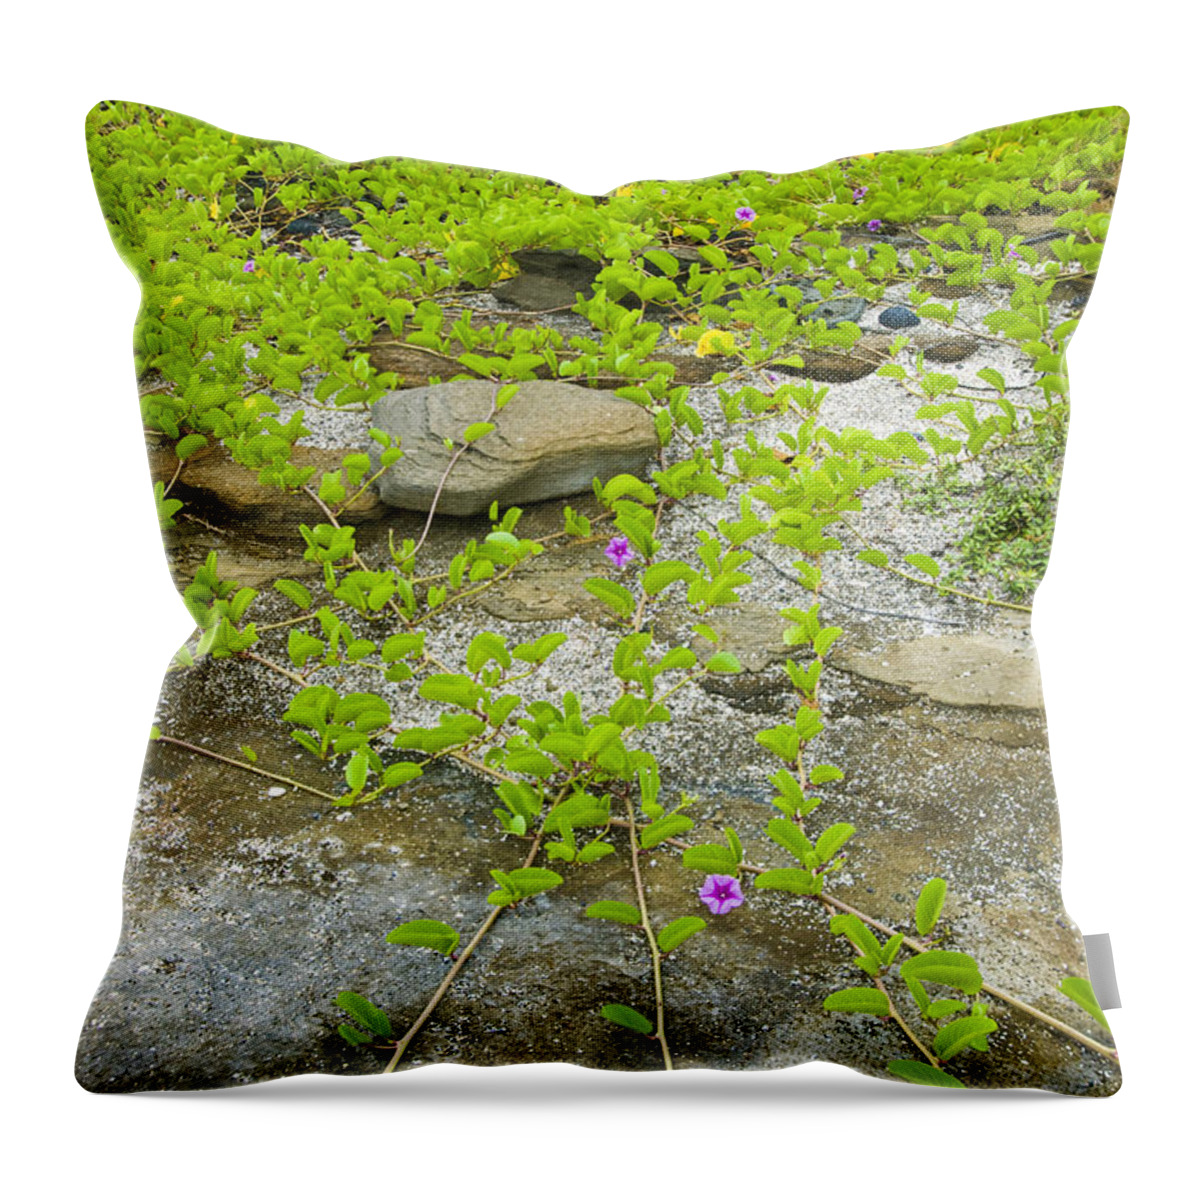 Beach Morning Glory Throw Pillow featuring the photograph Beach Morning Glory by William H. Mullins